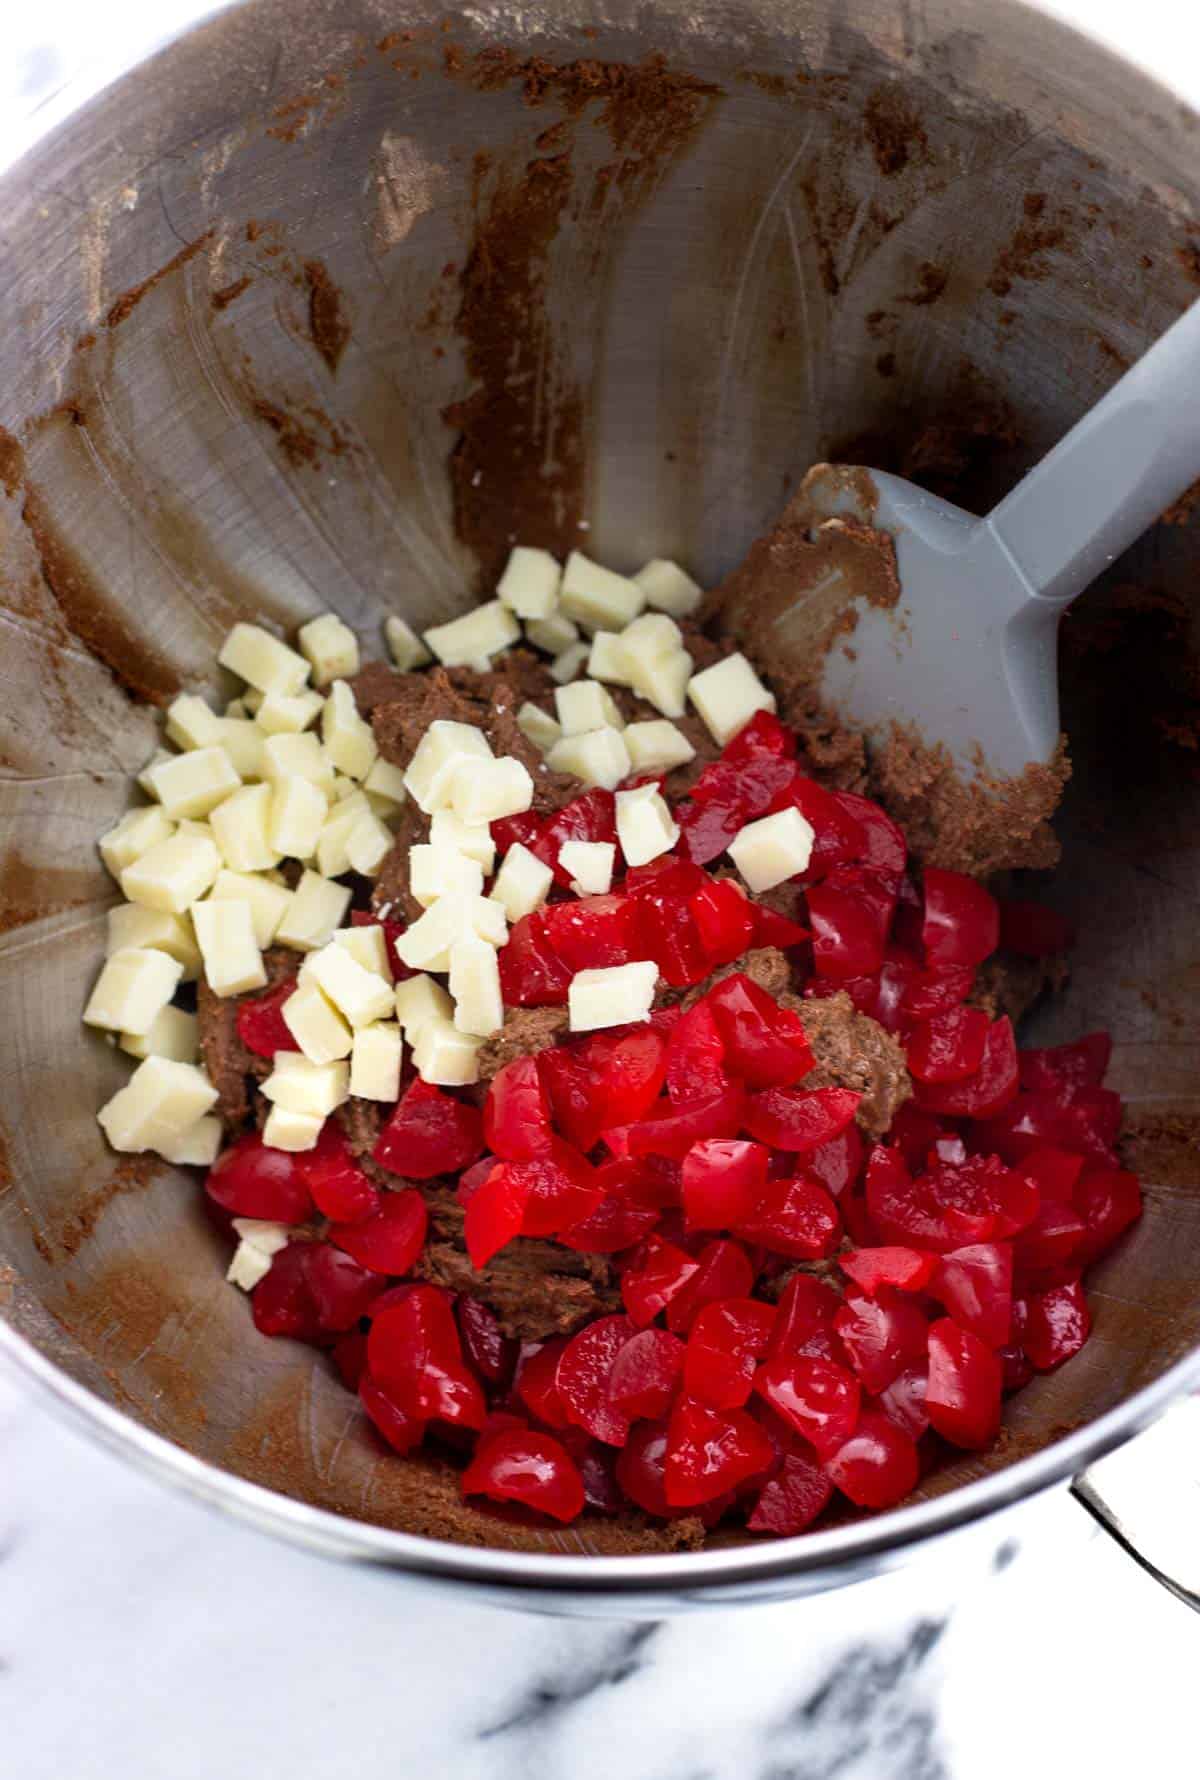 White chocolate and maraschino cherries added to the bowl of cookie dough.